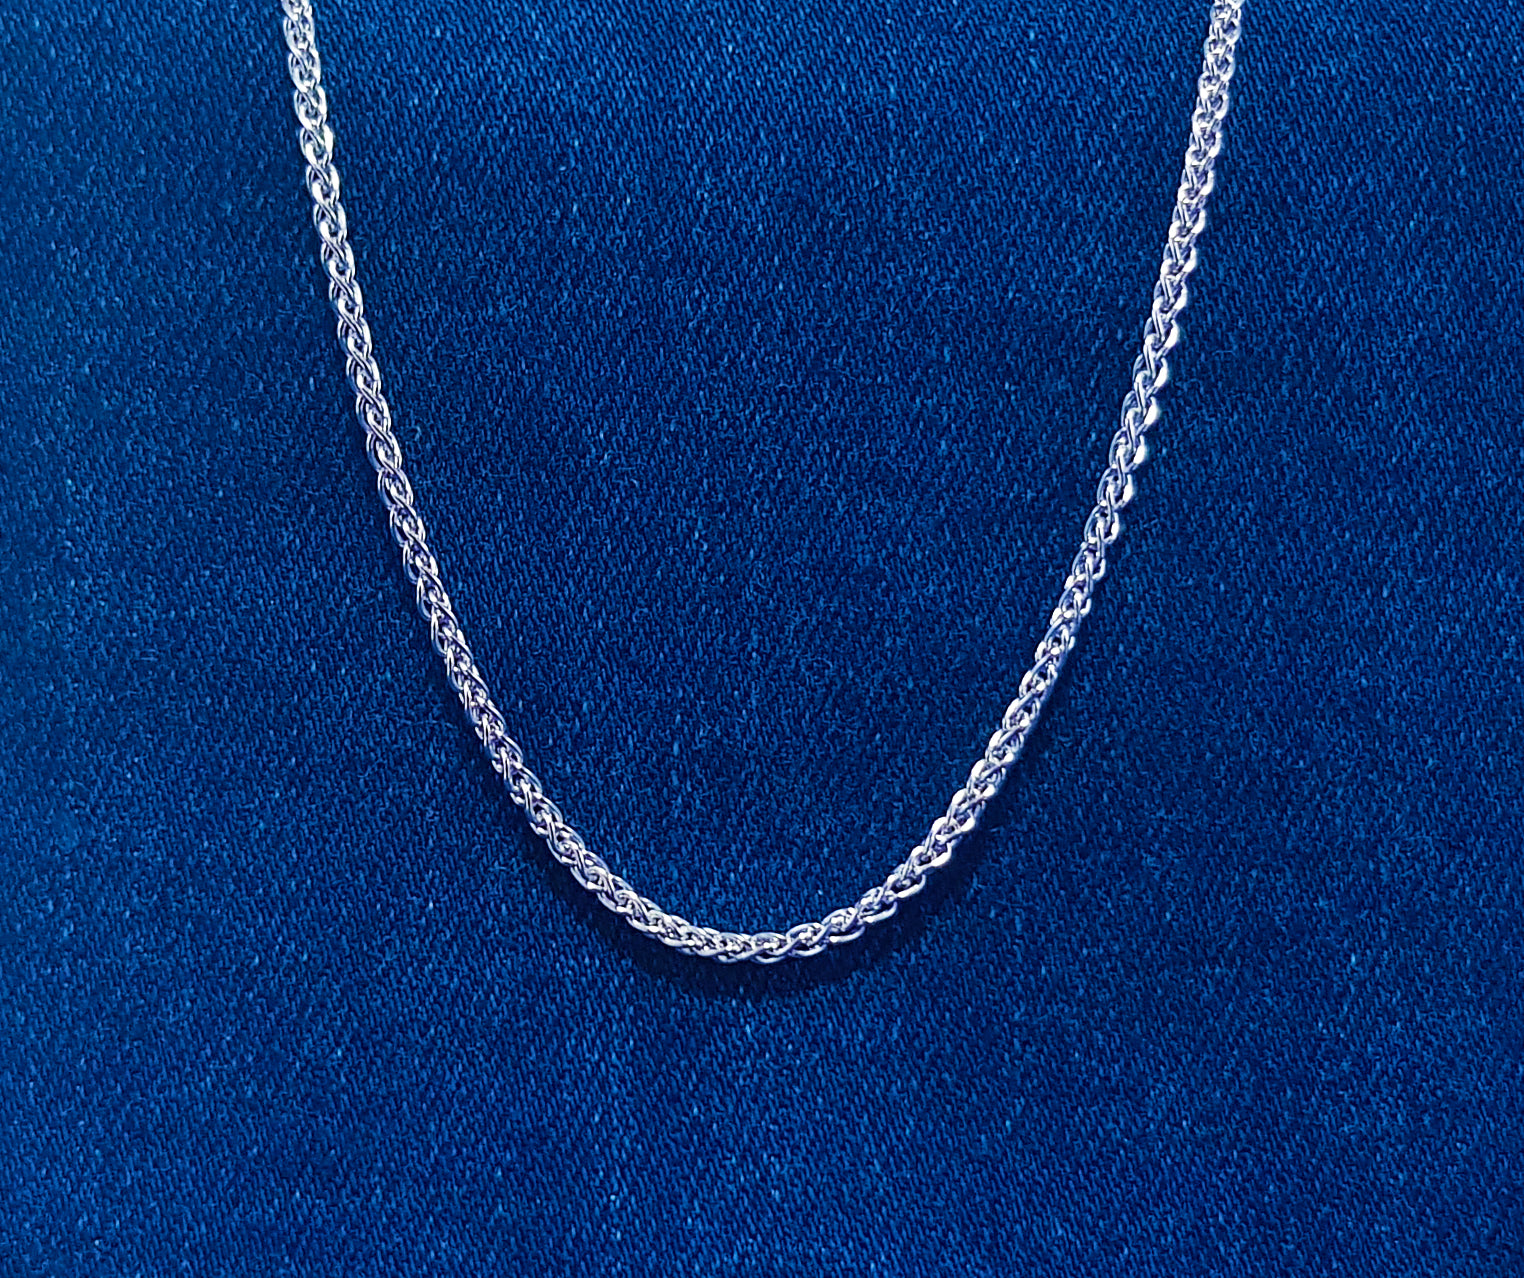 Wheat Chain - Sterling Silver with Rhodium. Available in a variety of Lengths.